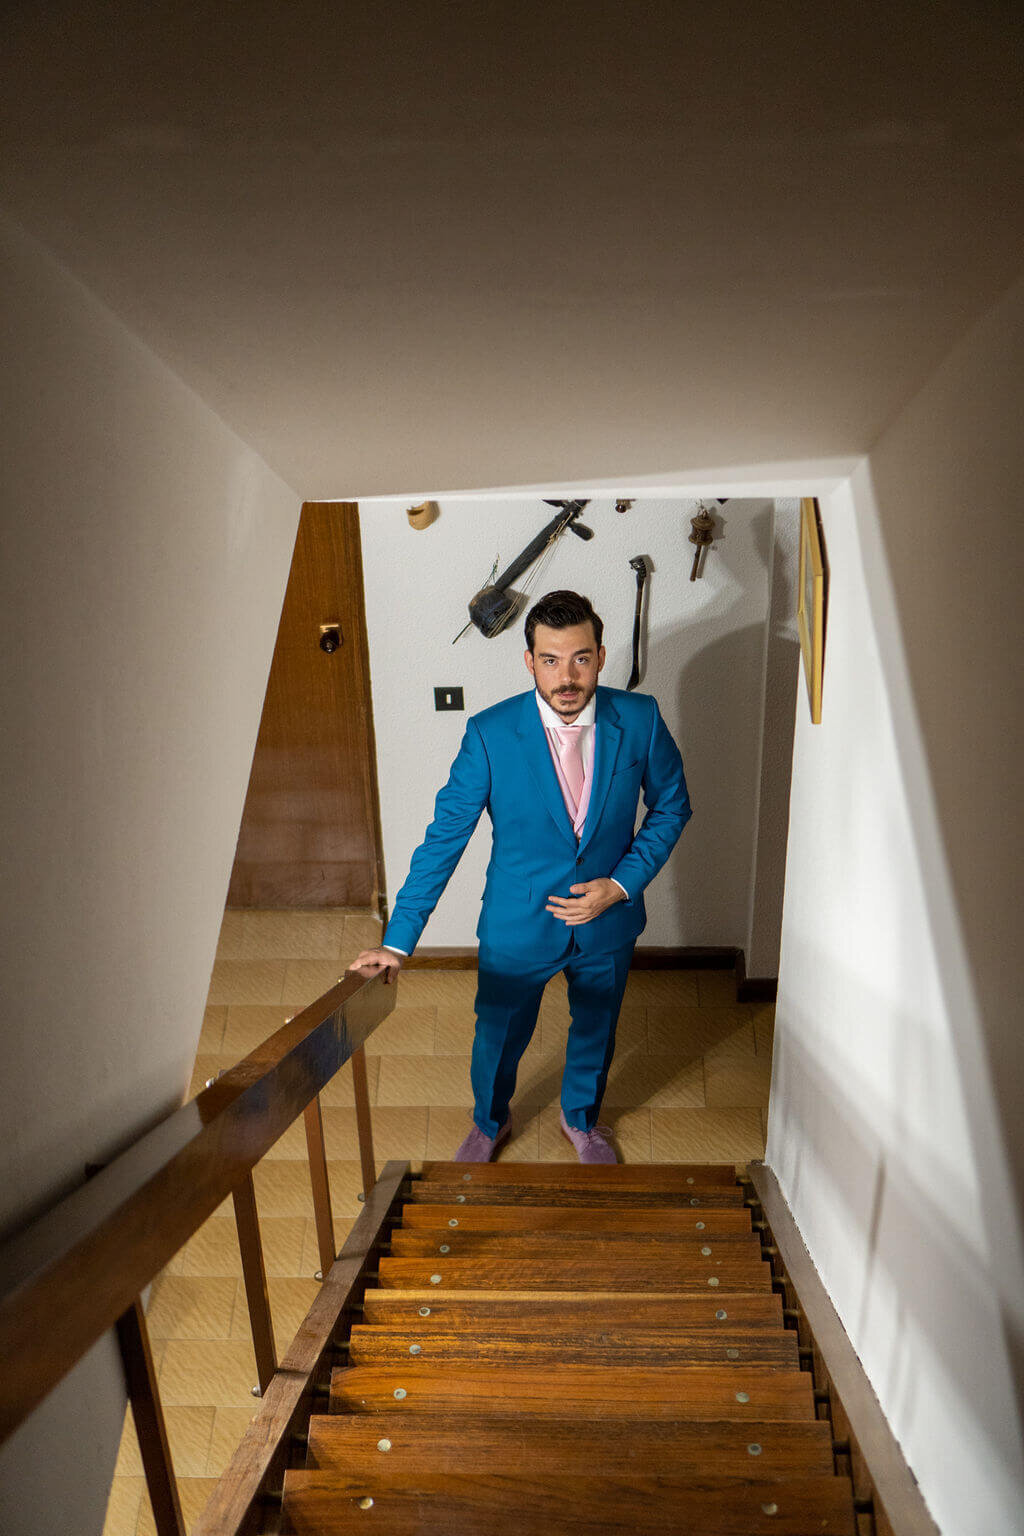 Best man looking up stairs to camera. Wearing blue suit